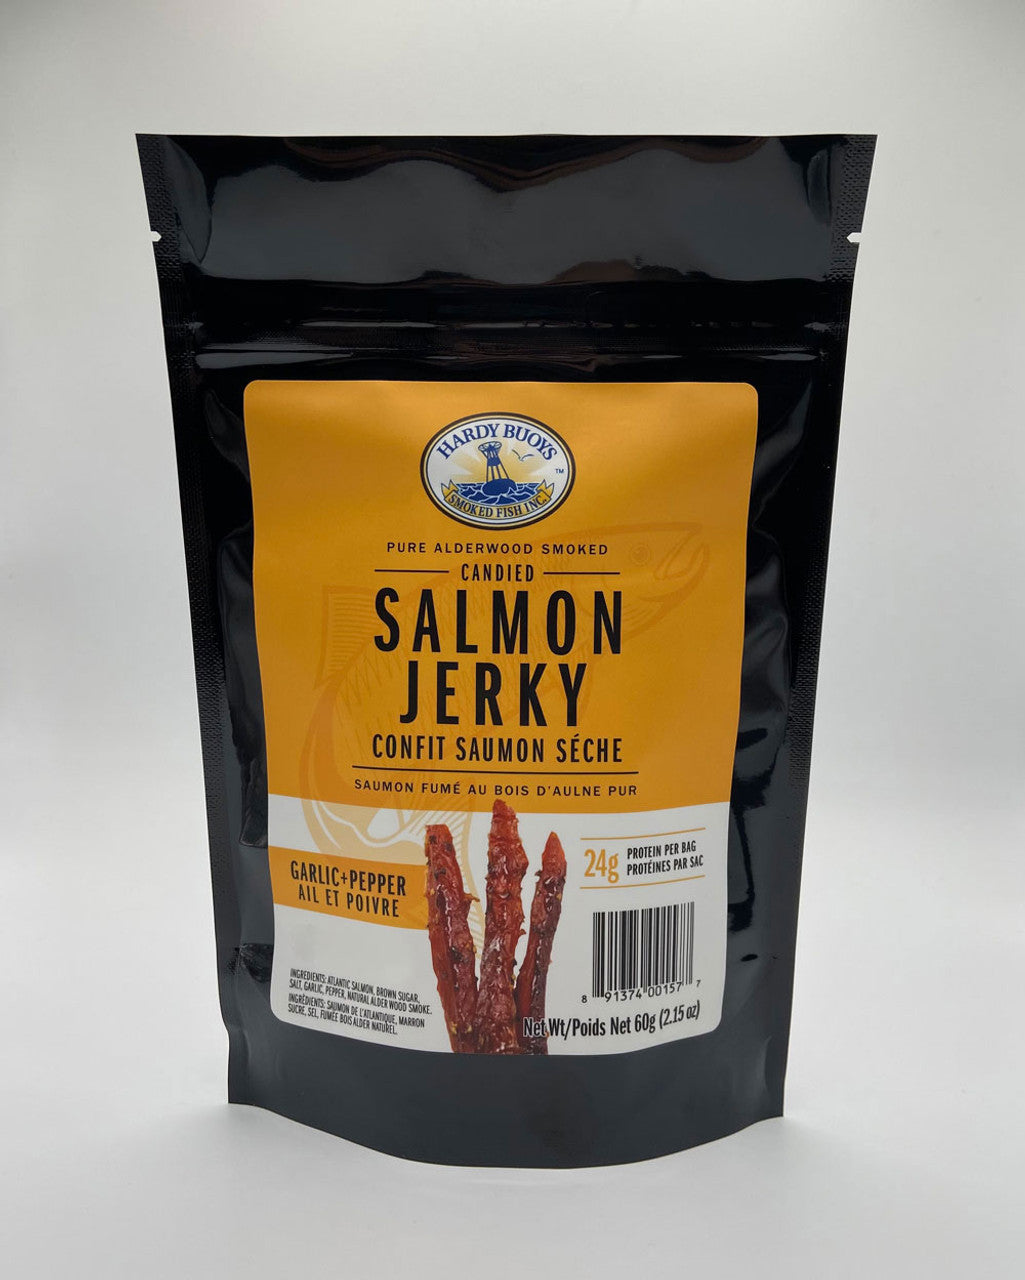 3 Pack Garlic & Pepper Candied Salmon-Jerky